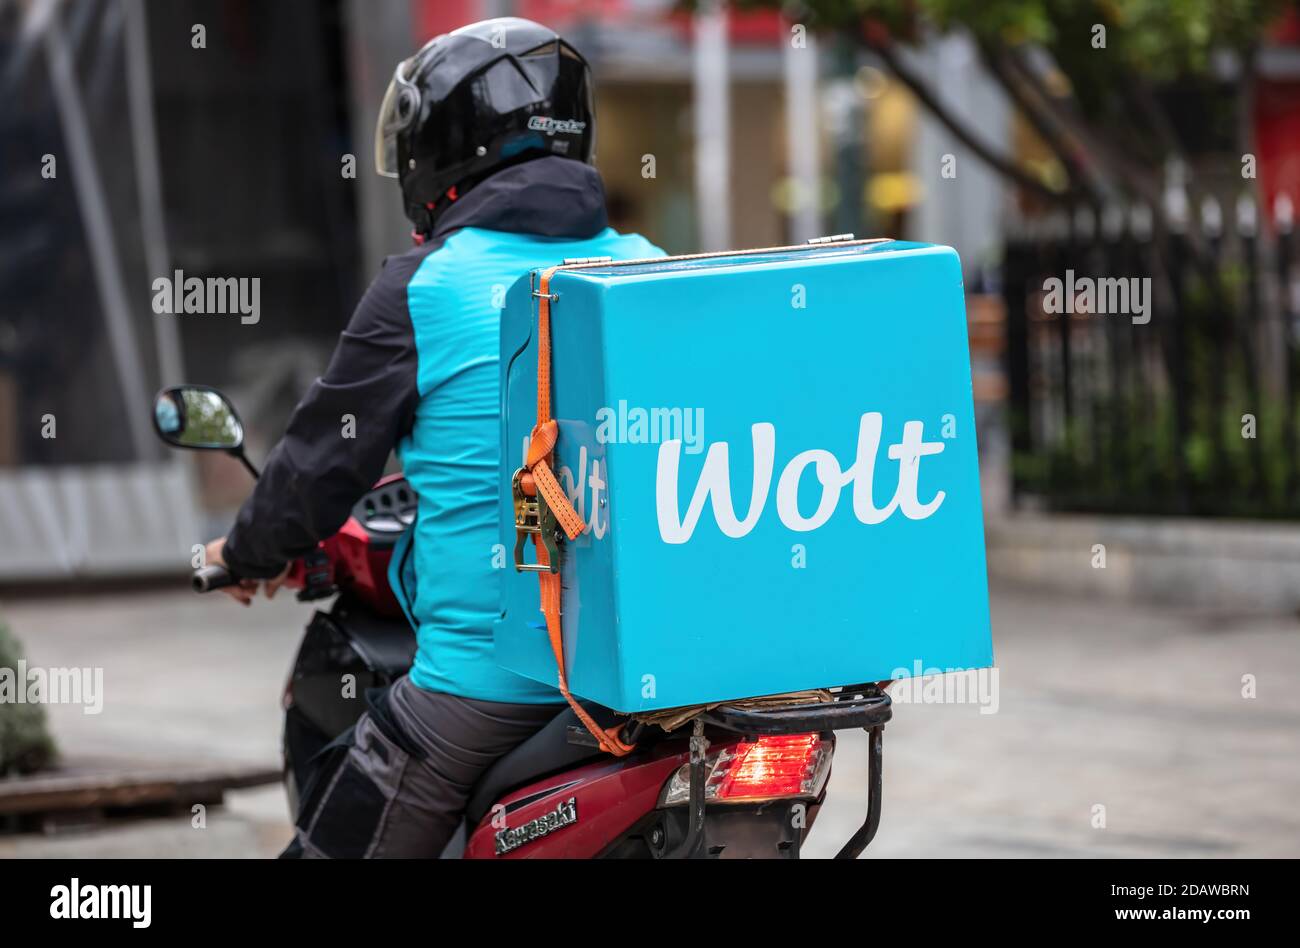 Athens, Greece. November 12, 2020. Wolt food delivery service, courier riding a scooter in the city center street, rear view Stock Photo